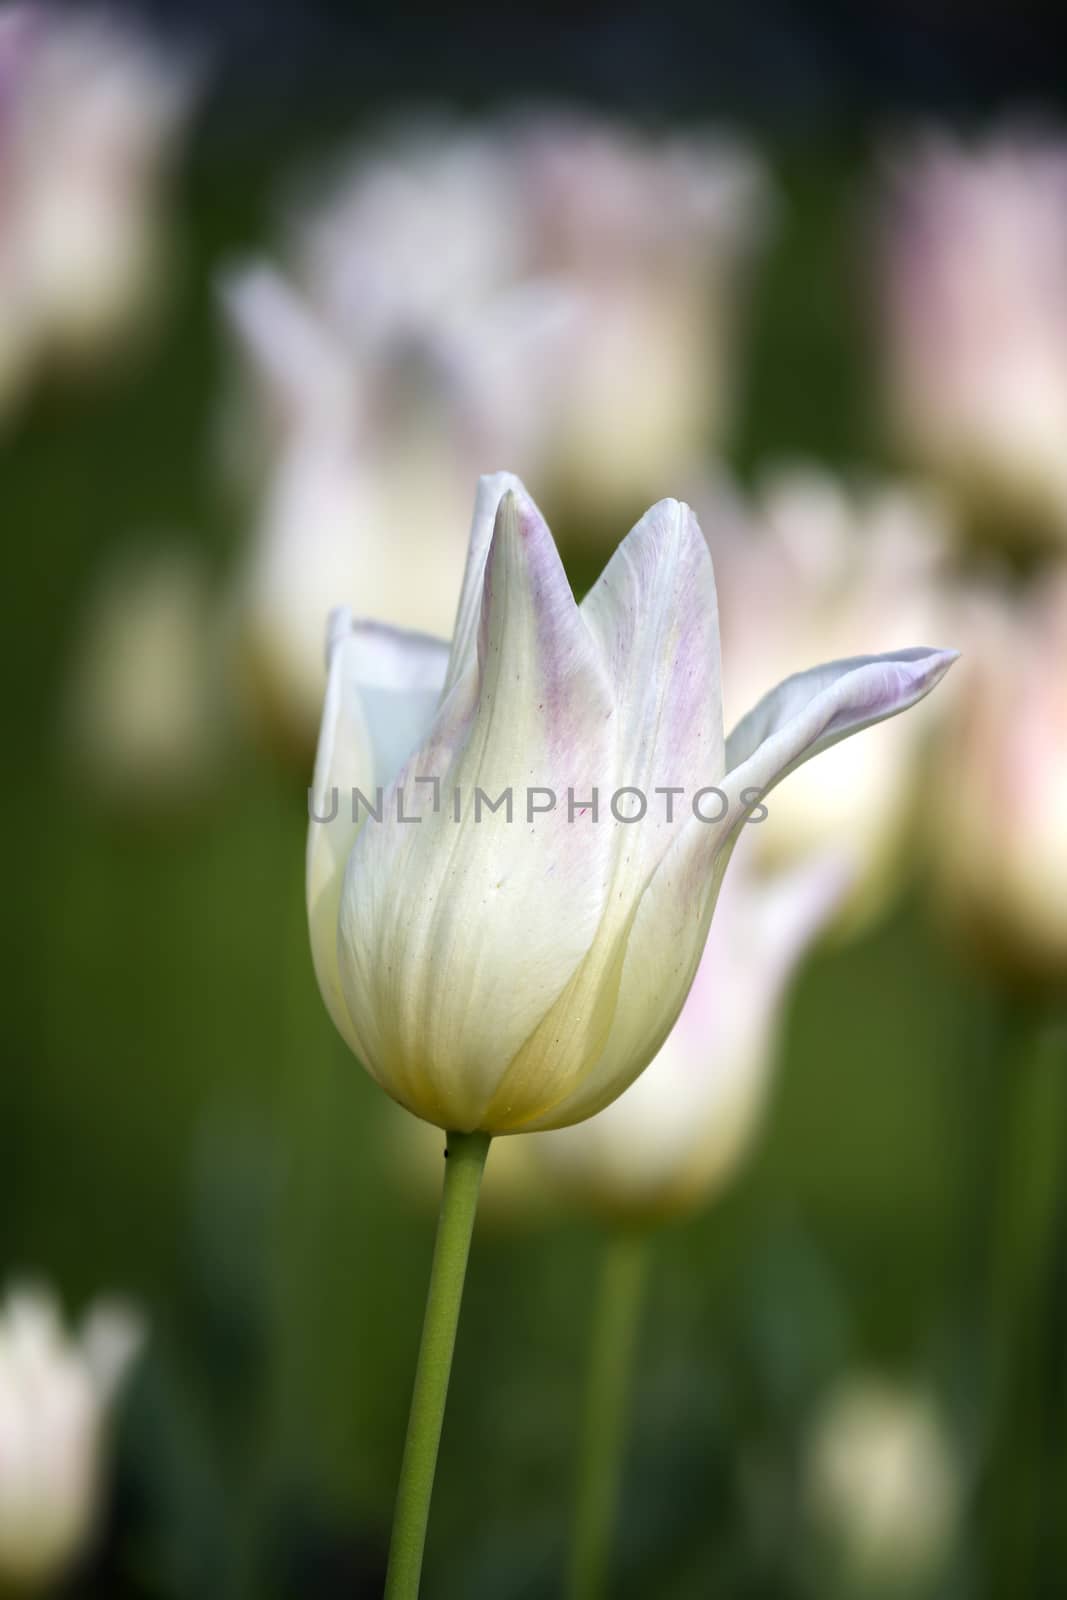 Beautiful white tulips in spring